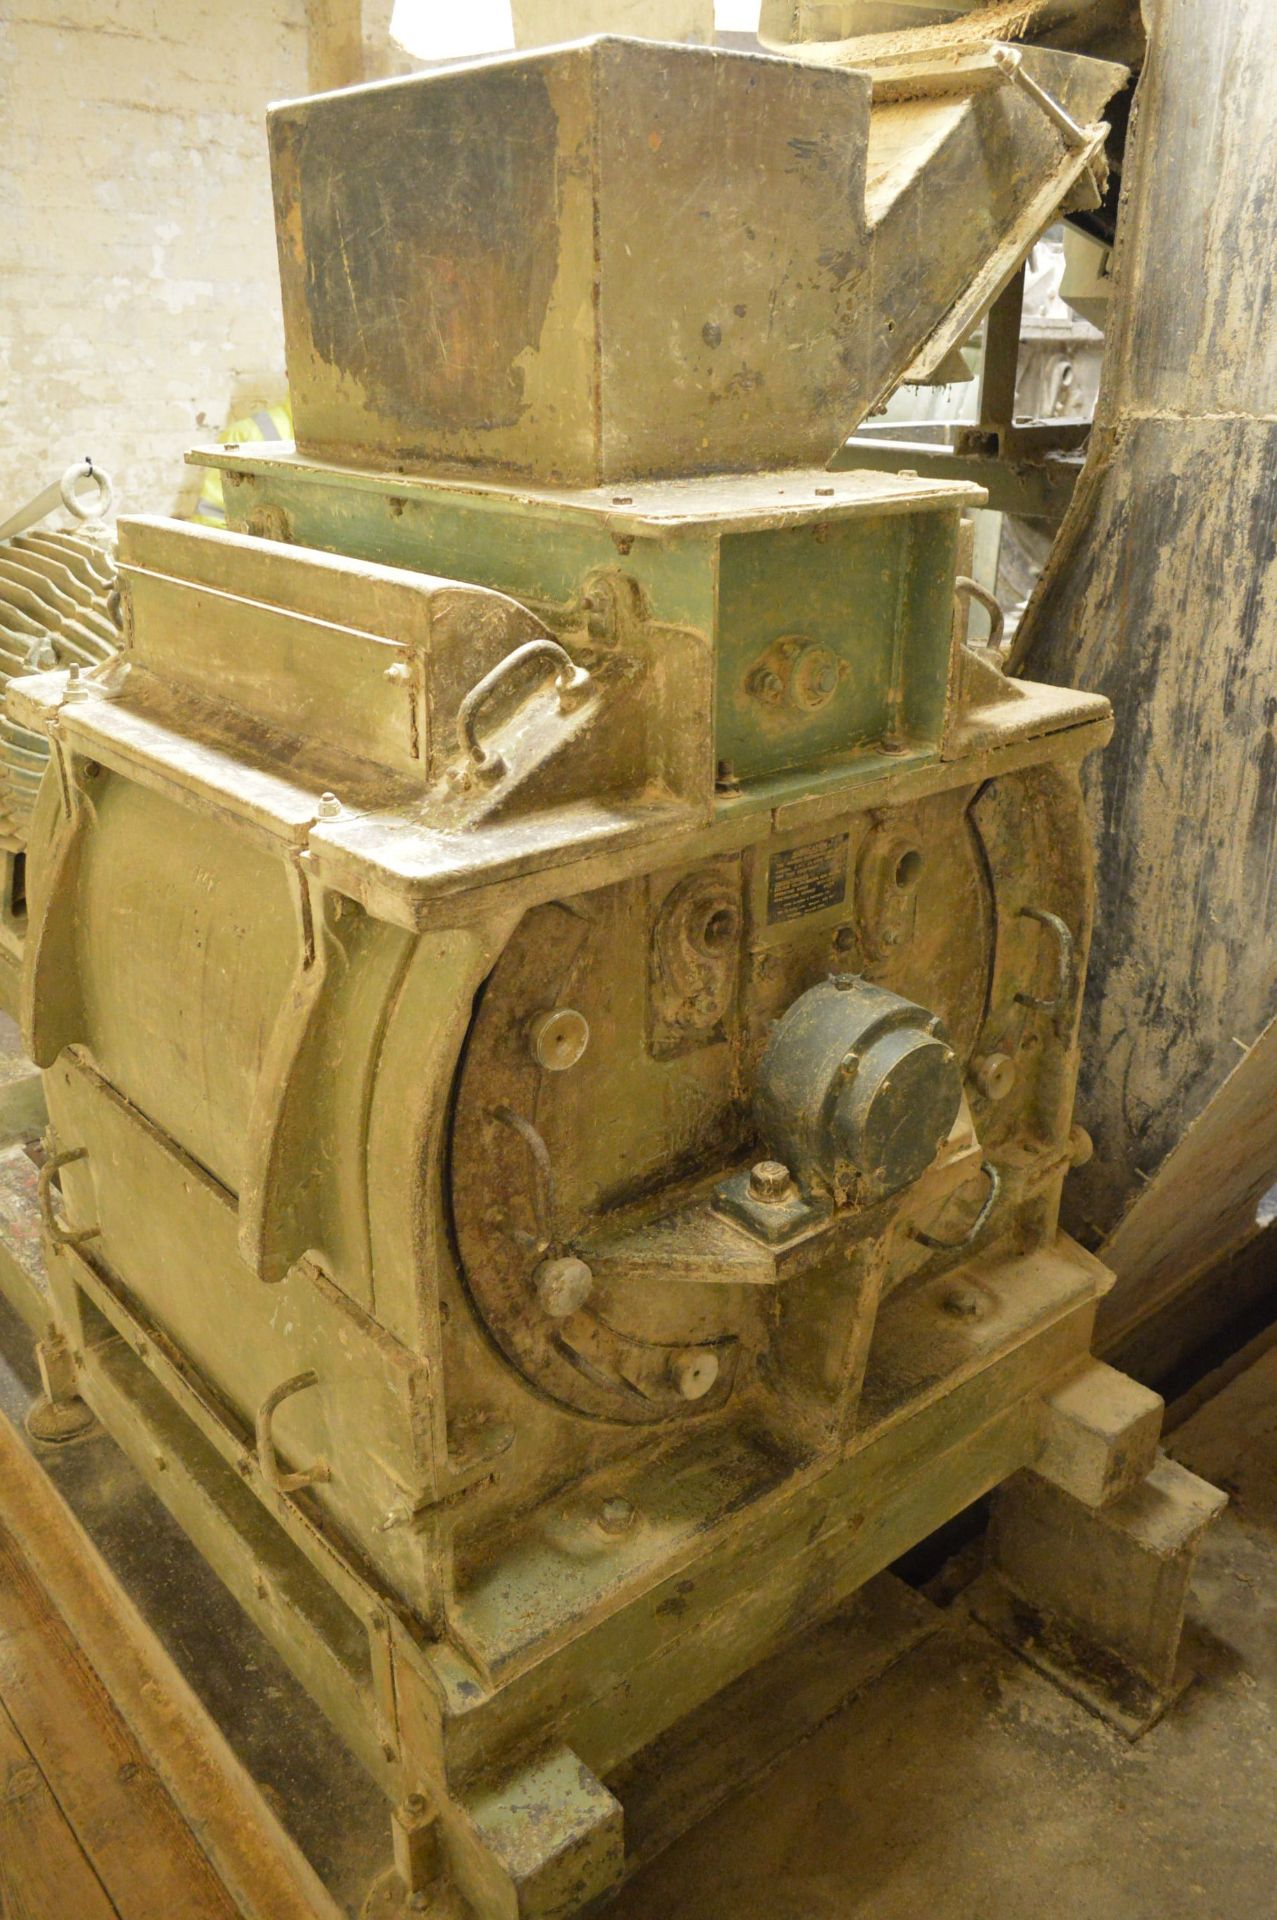 Christy & Norris X26 HAMMER MILL GRINDER, with GEC 90kW electric motor, 2970rpm, vibratory feeder - Image 2 of 9